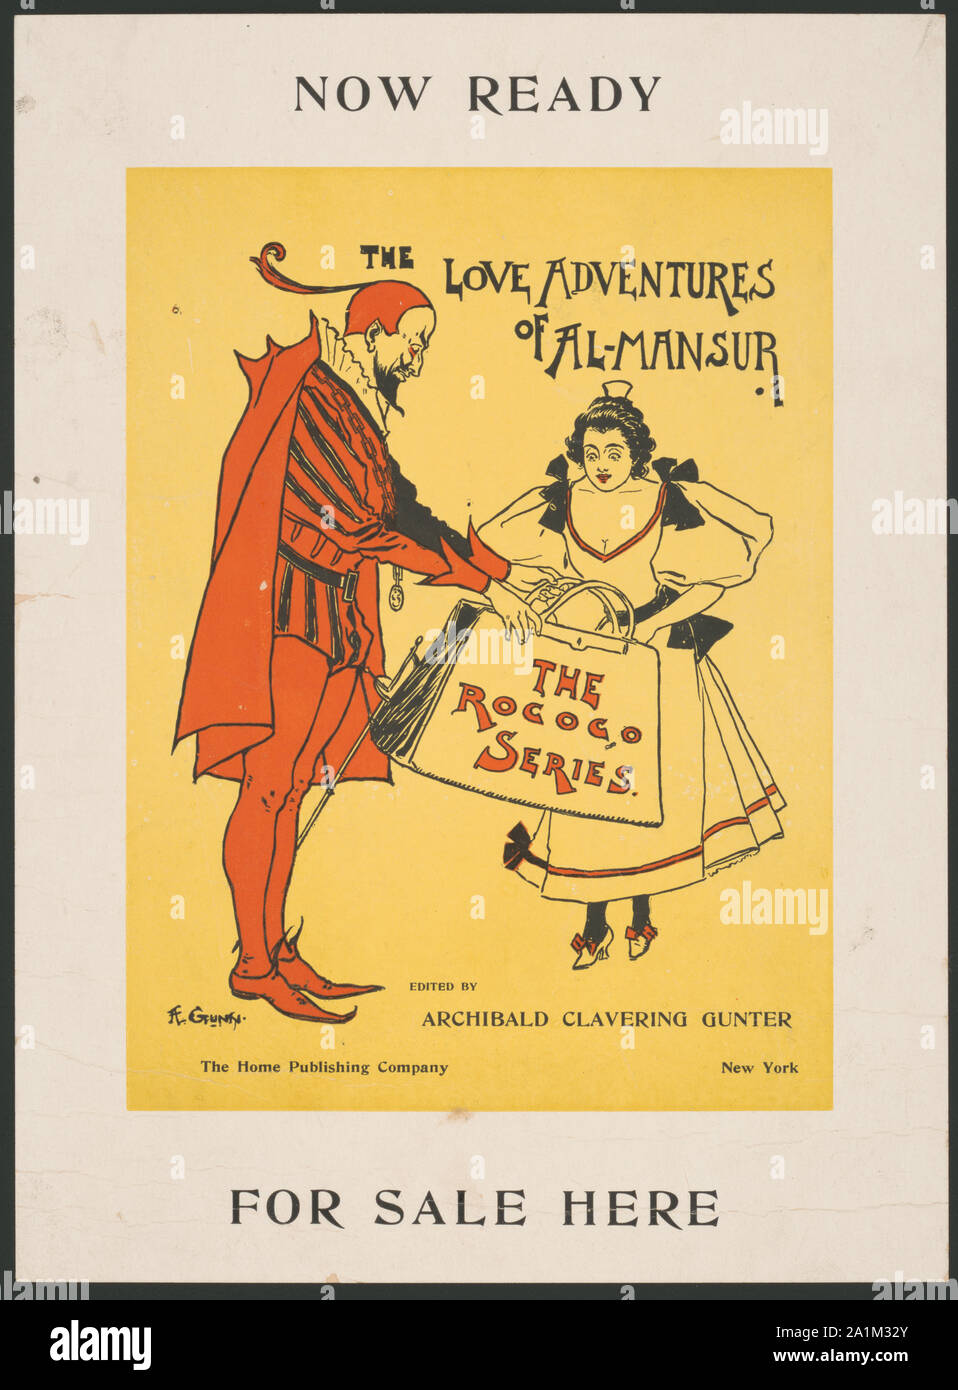 Now ready, The Love Adventures of Al-Mansur, edited by Archibald Clavering Gunter ... for sale here / A. Gunn. Stock Photo